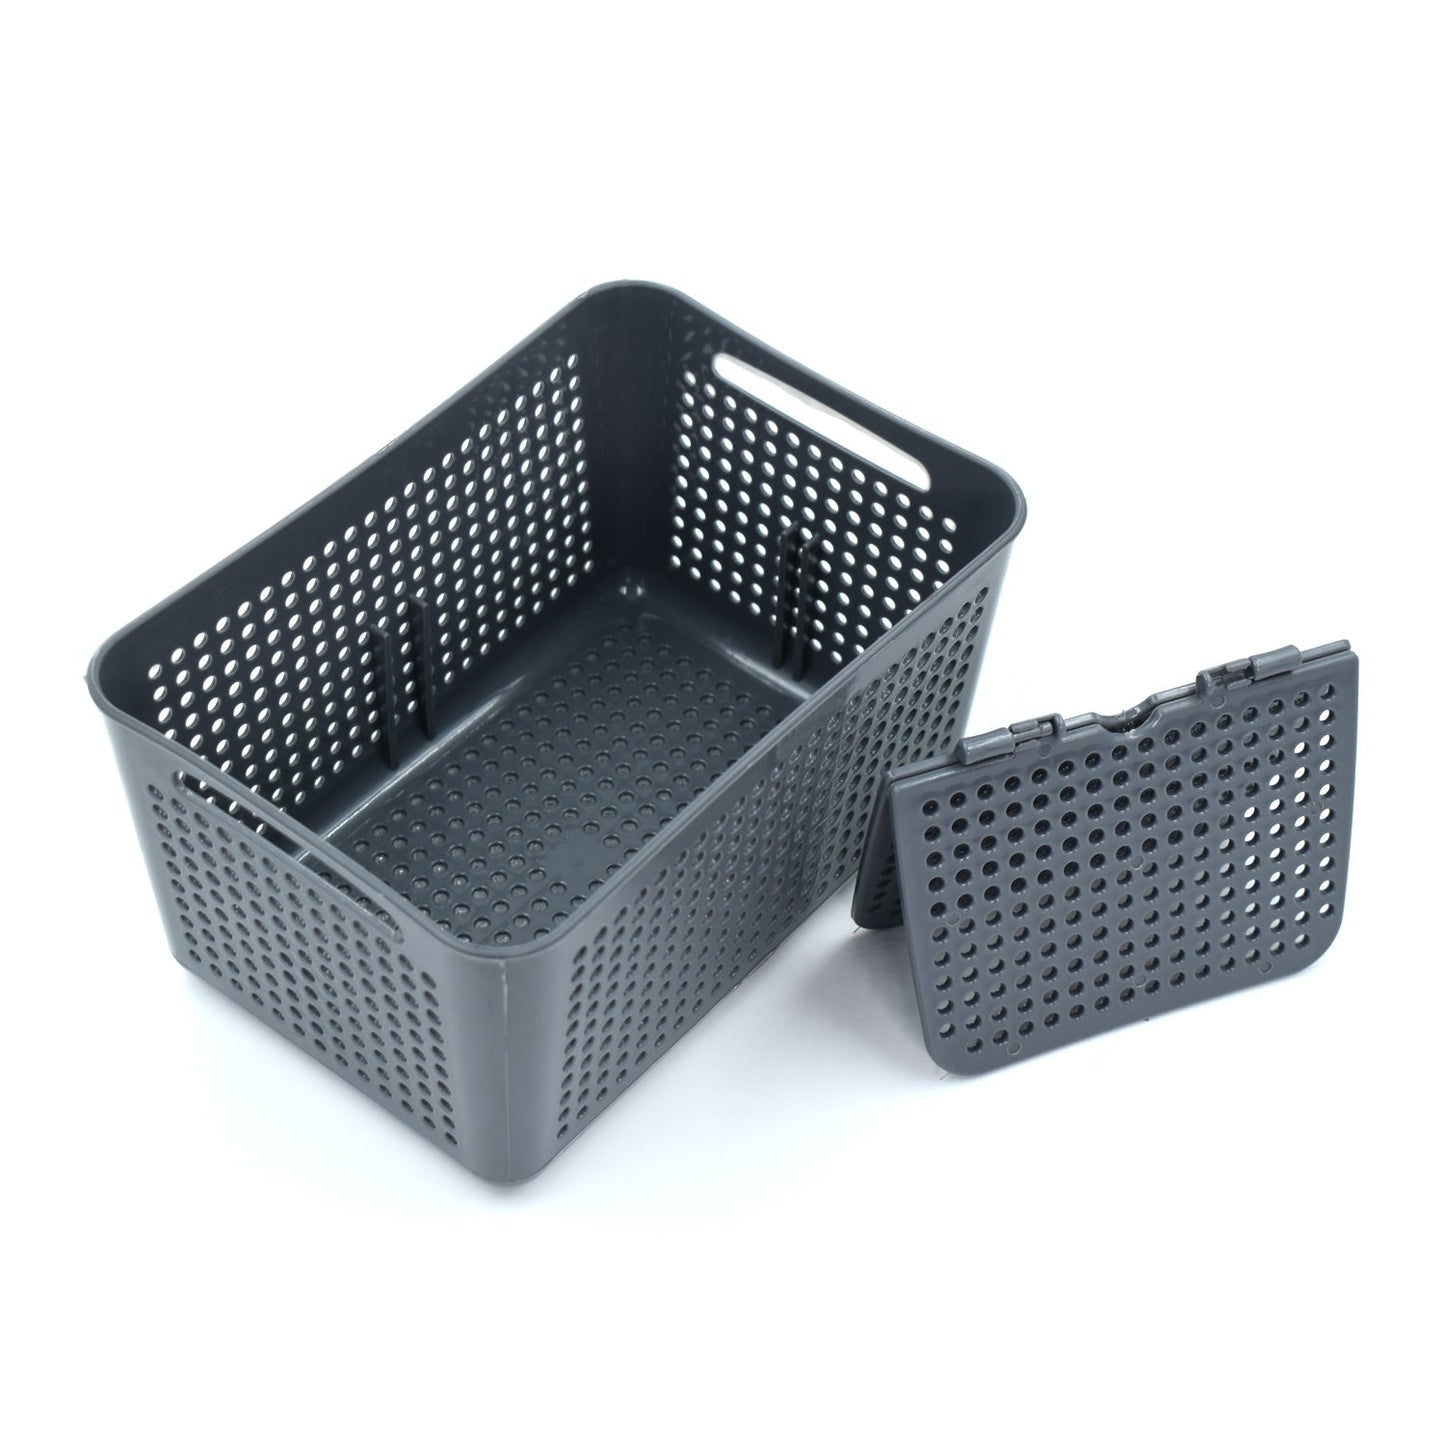 2826 Fordable Silicone Kitchen Organizer Fruit Vegetable Baskets Folding Strainers 